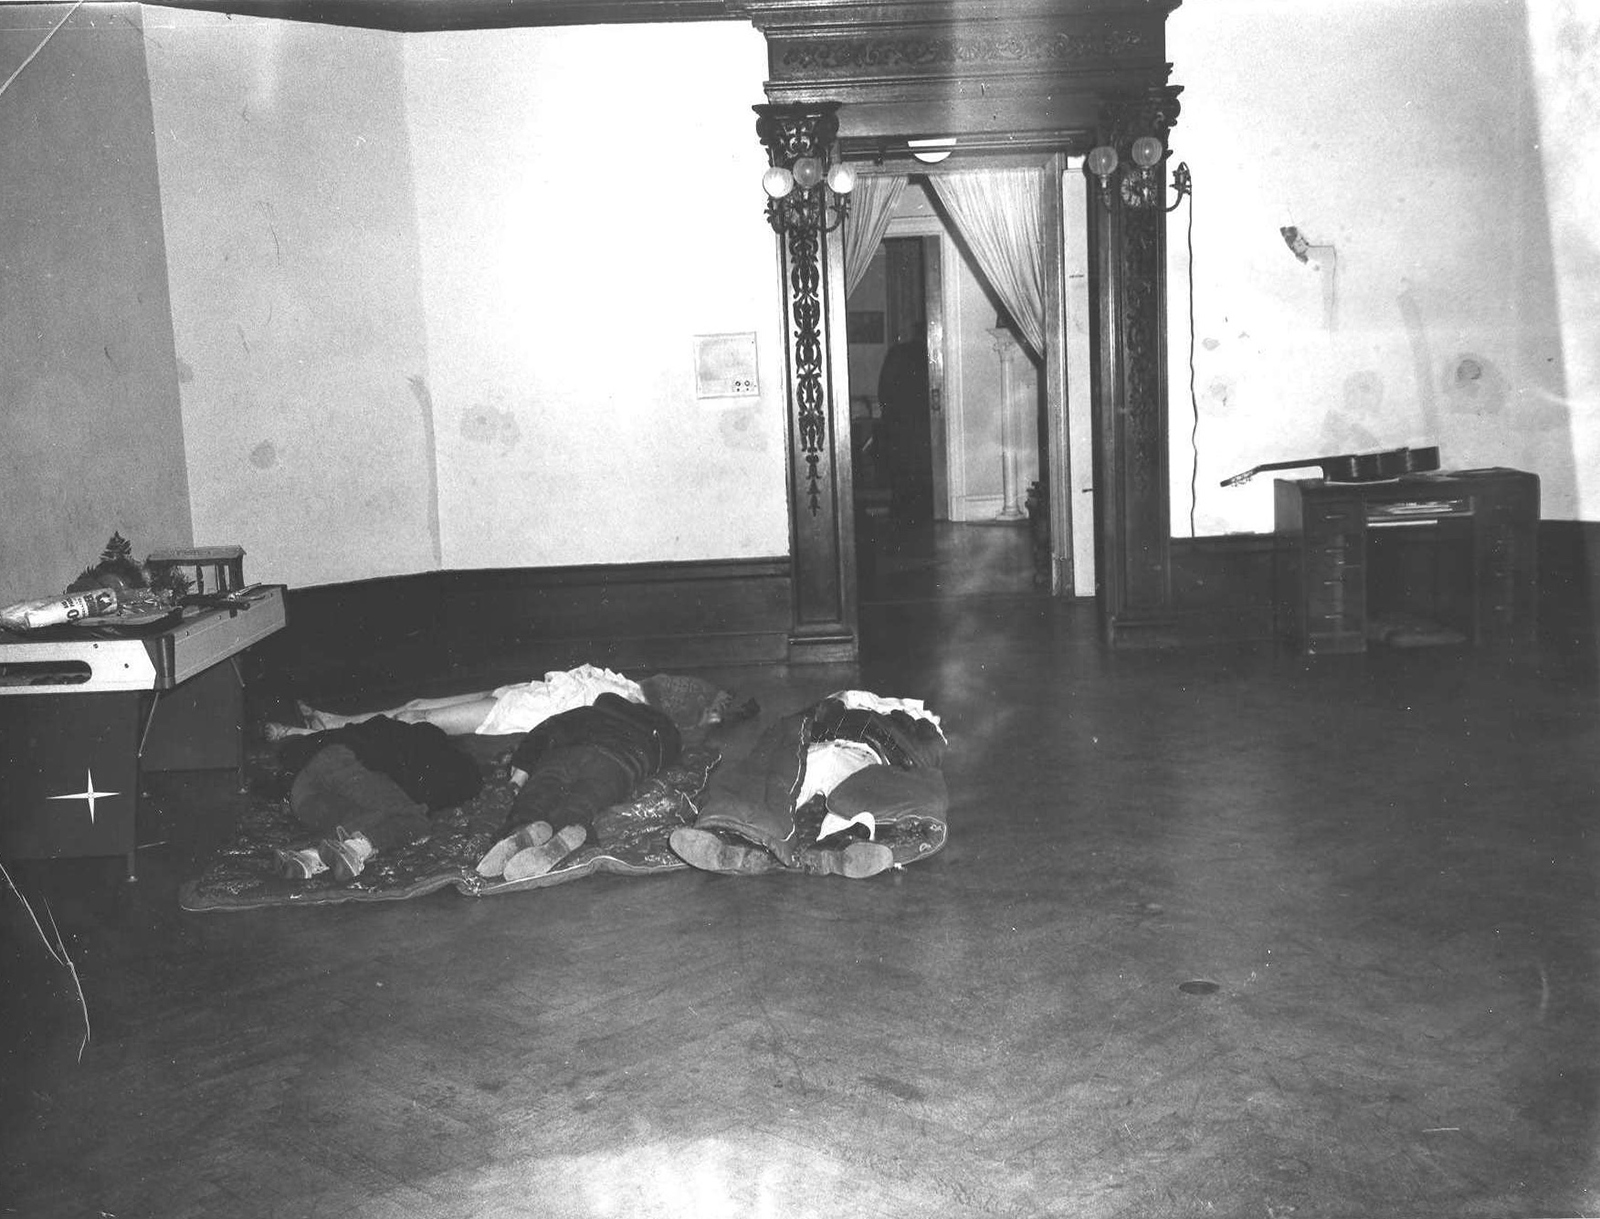 A police photo of the bodies as they were discovered in the ballroom Dec. 7, 1971.